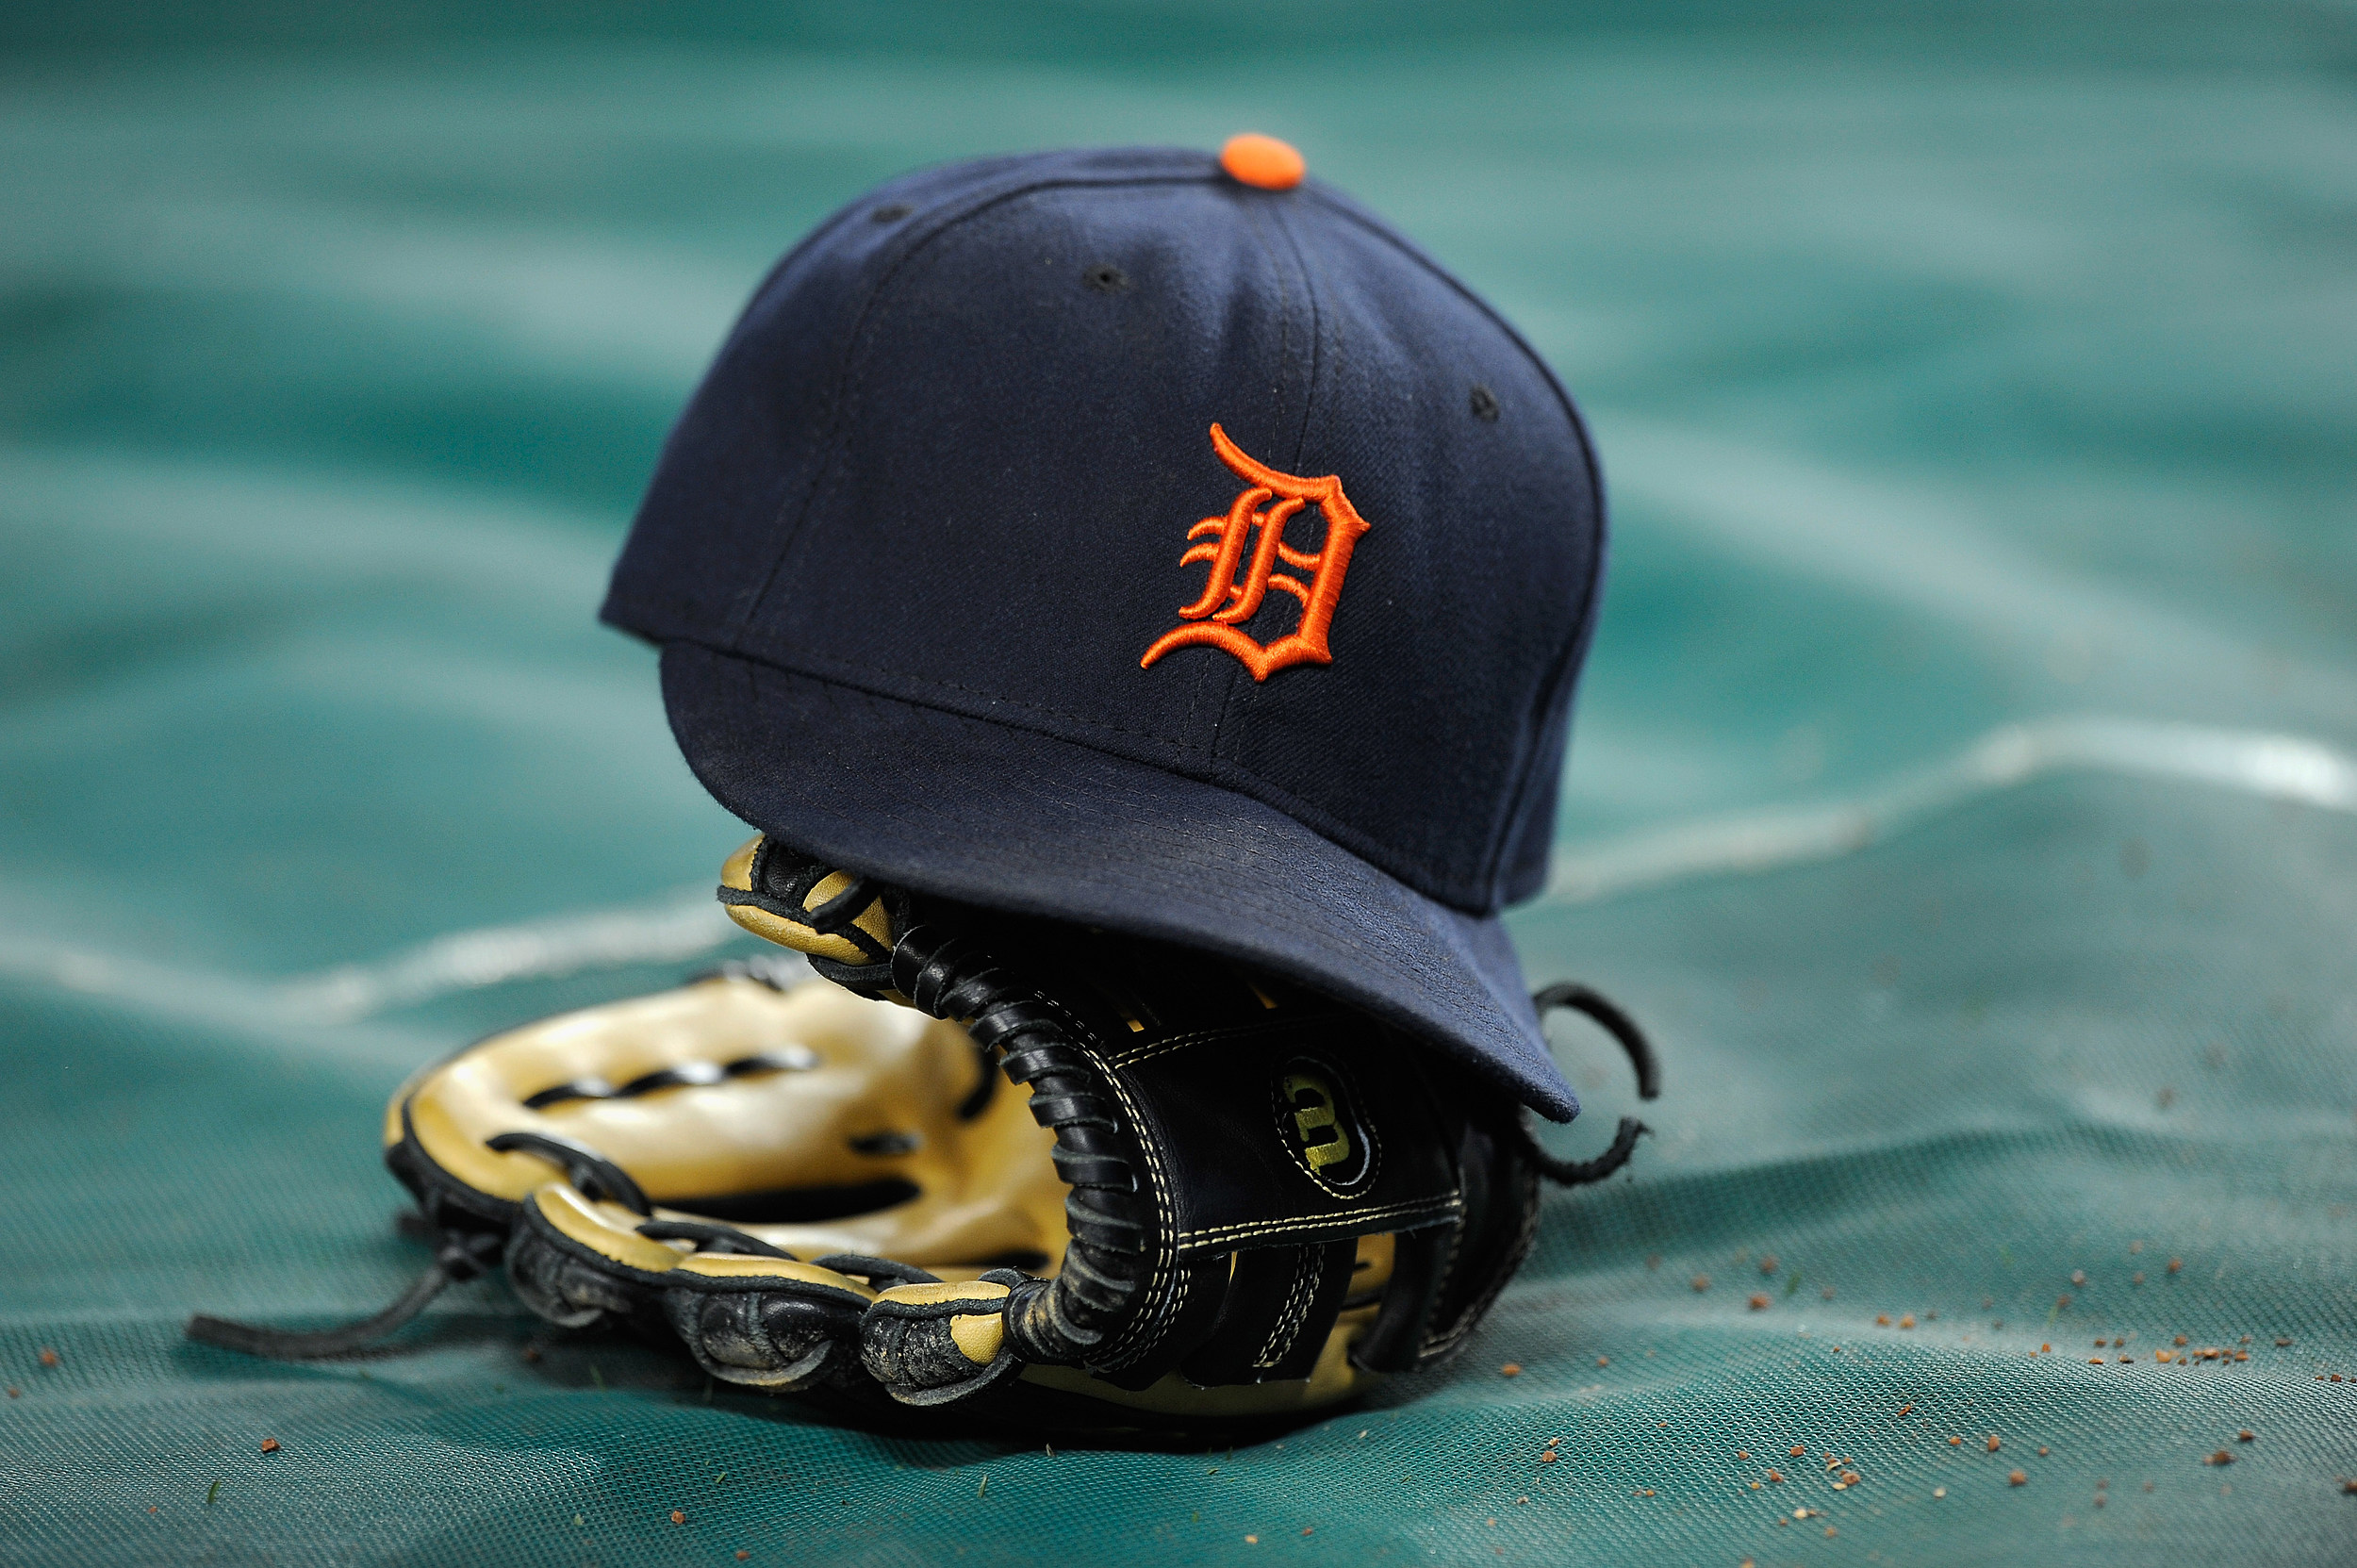 Survey: Tigers' Paws is second most popular mascot in baseball